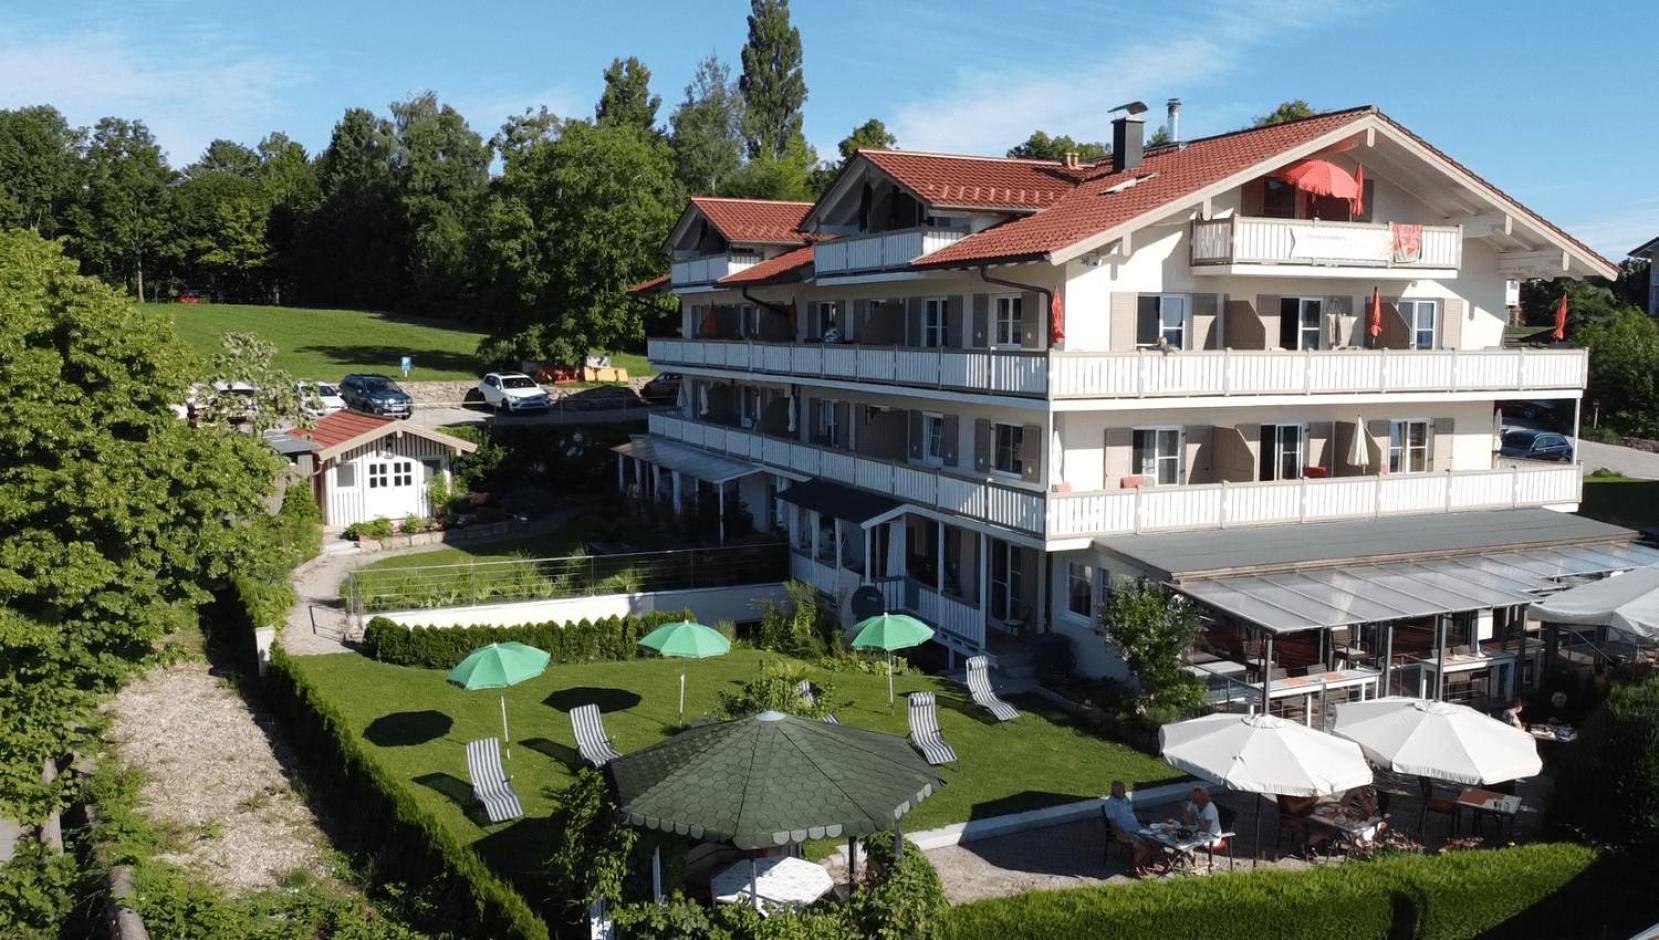 Chiemseestern Vacation & Recreation "Adults Only" Gstadt am Chiemsee Ngoại thất bức ảnh